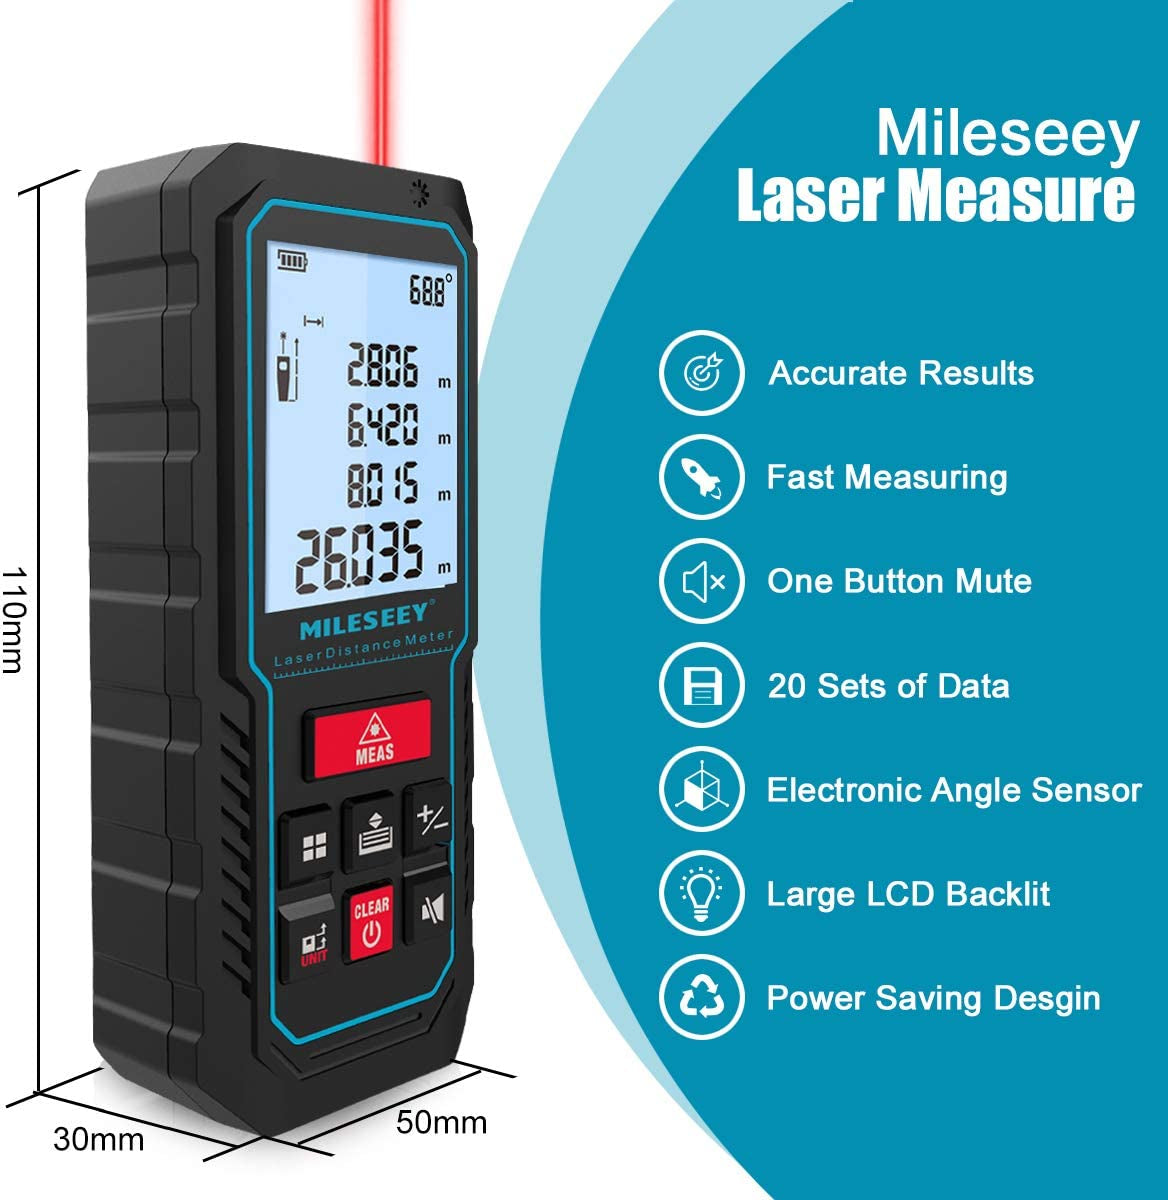 MiLESEEY, Mileseey Laser Measure, 229Ft M/In/Ft Digital Distance Meter, Laser Measurement Tool with Electronic Angle Sensor, Backlit LCD, Pythagorean Mode, Measuring Distance, Area and Volume